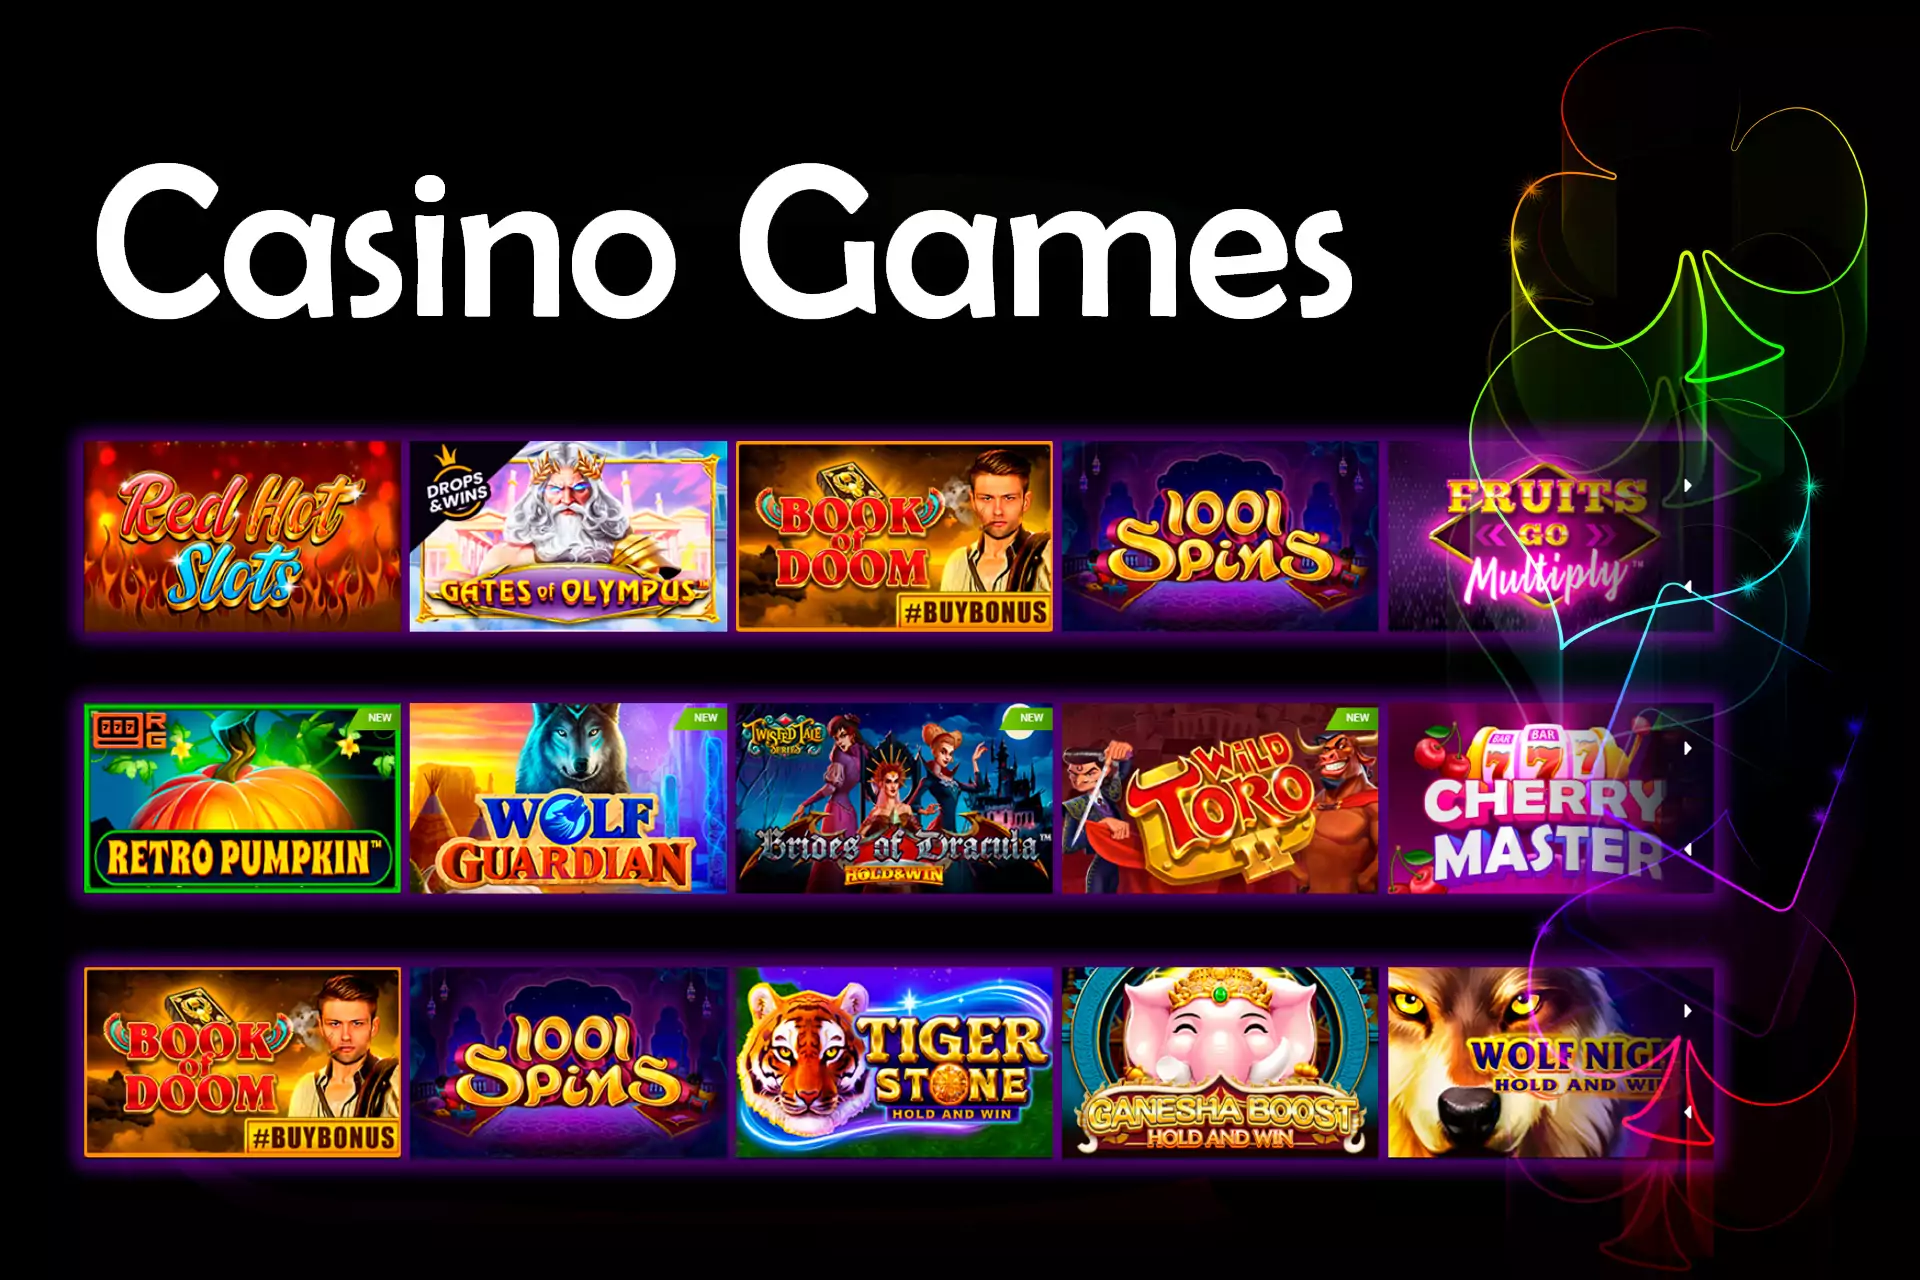 In the Casino section, you find all the popular games from different providers.